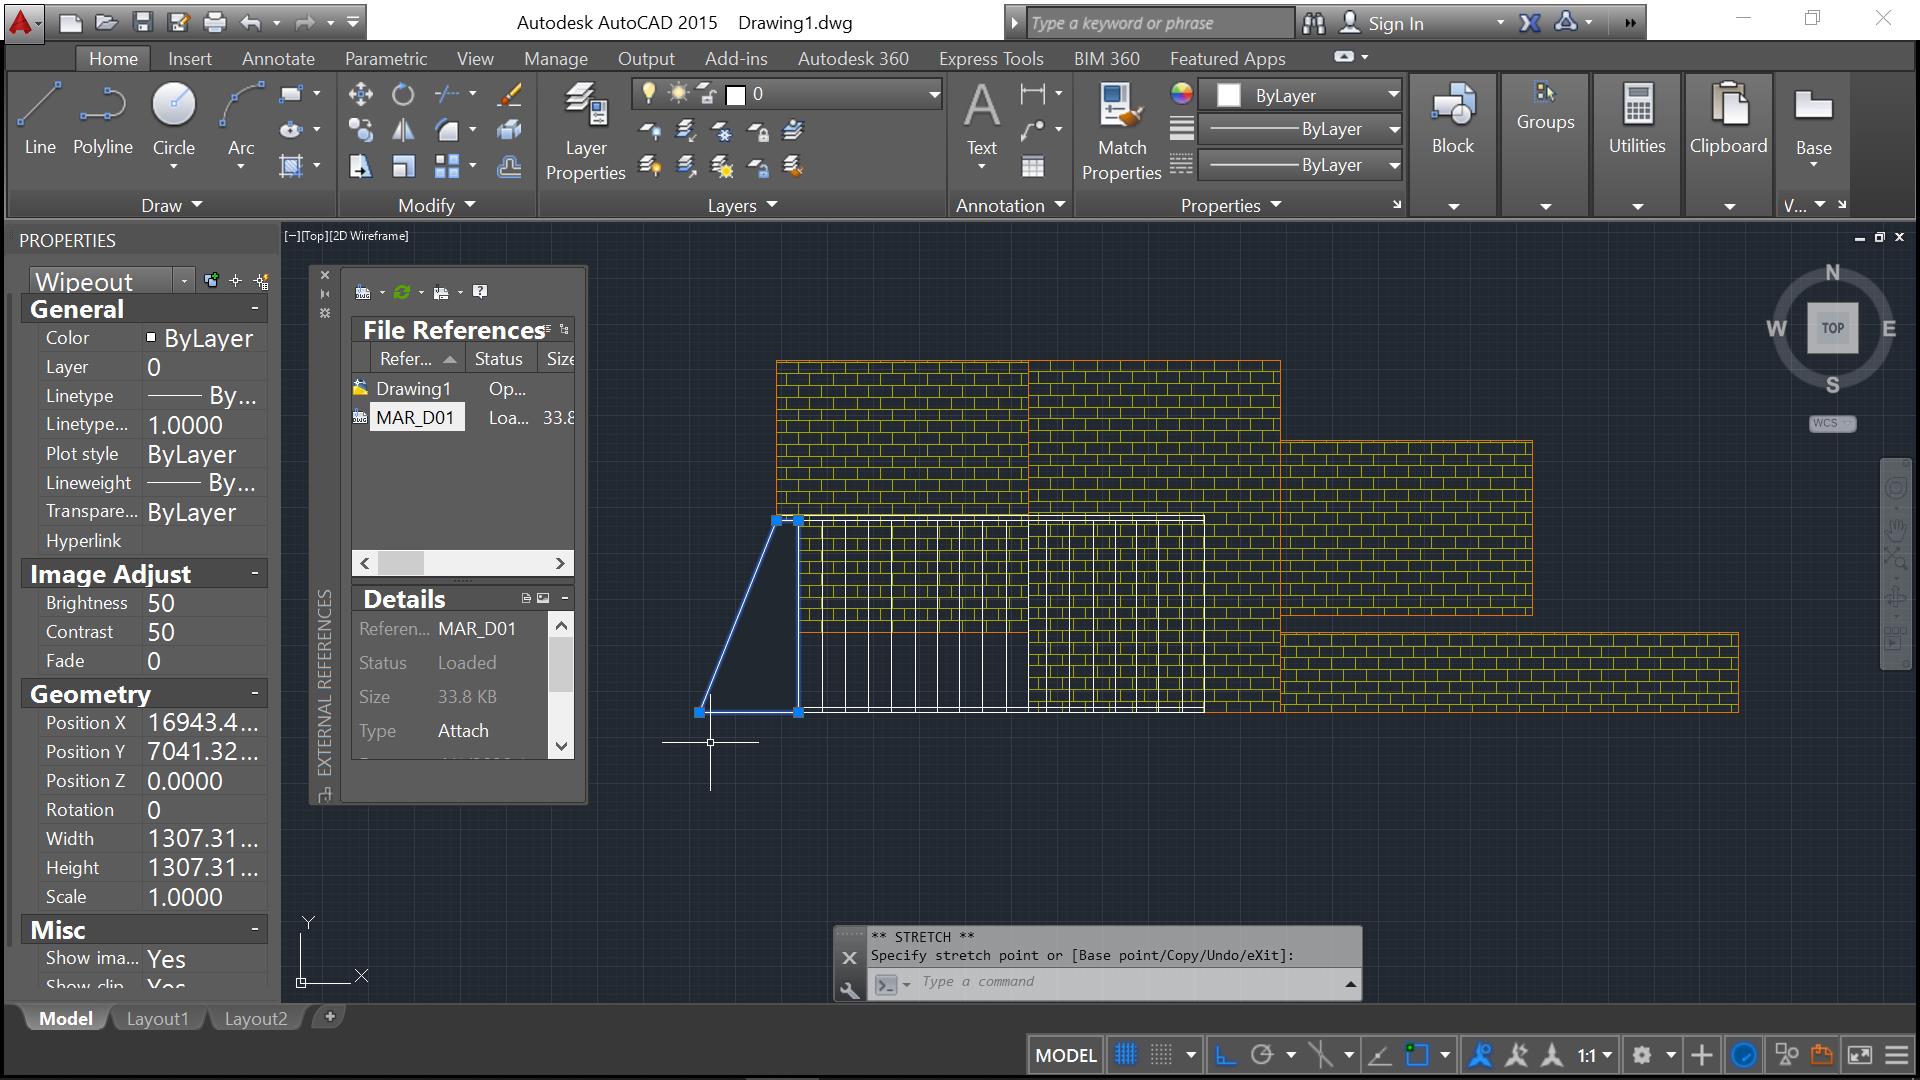 Wipeout tool Autocad 